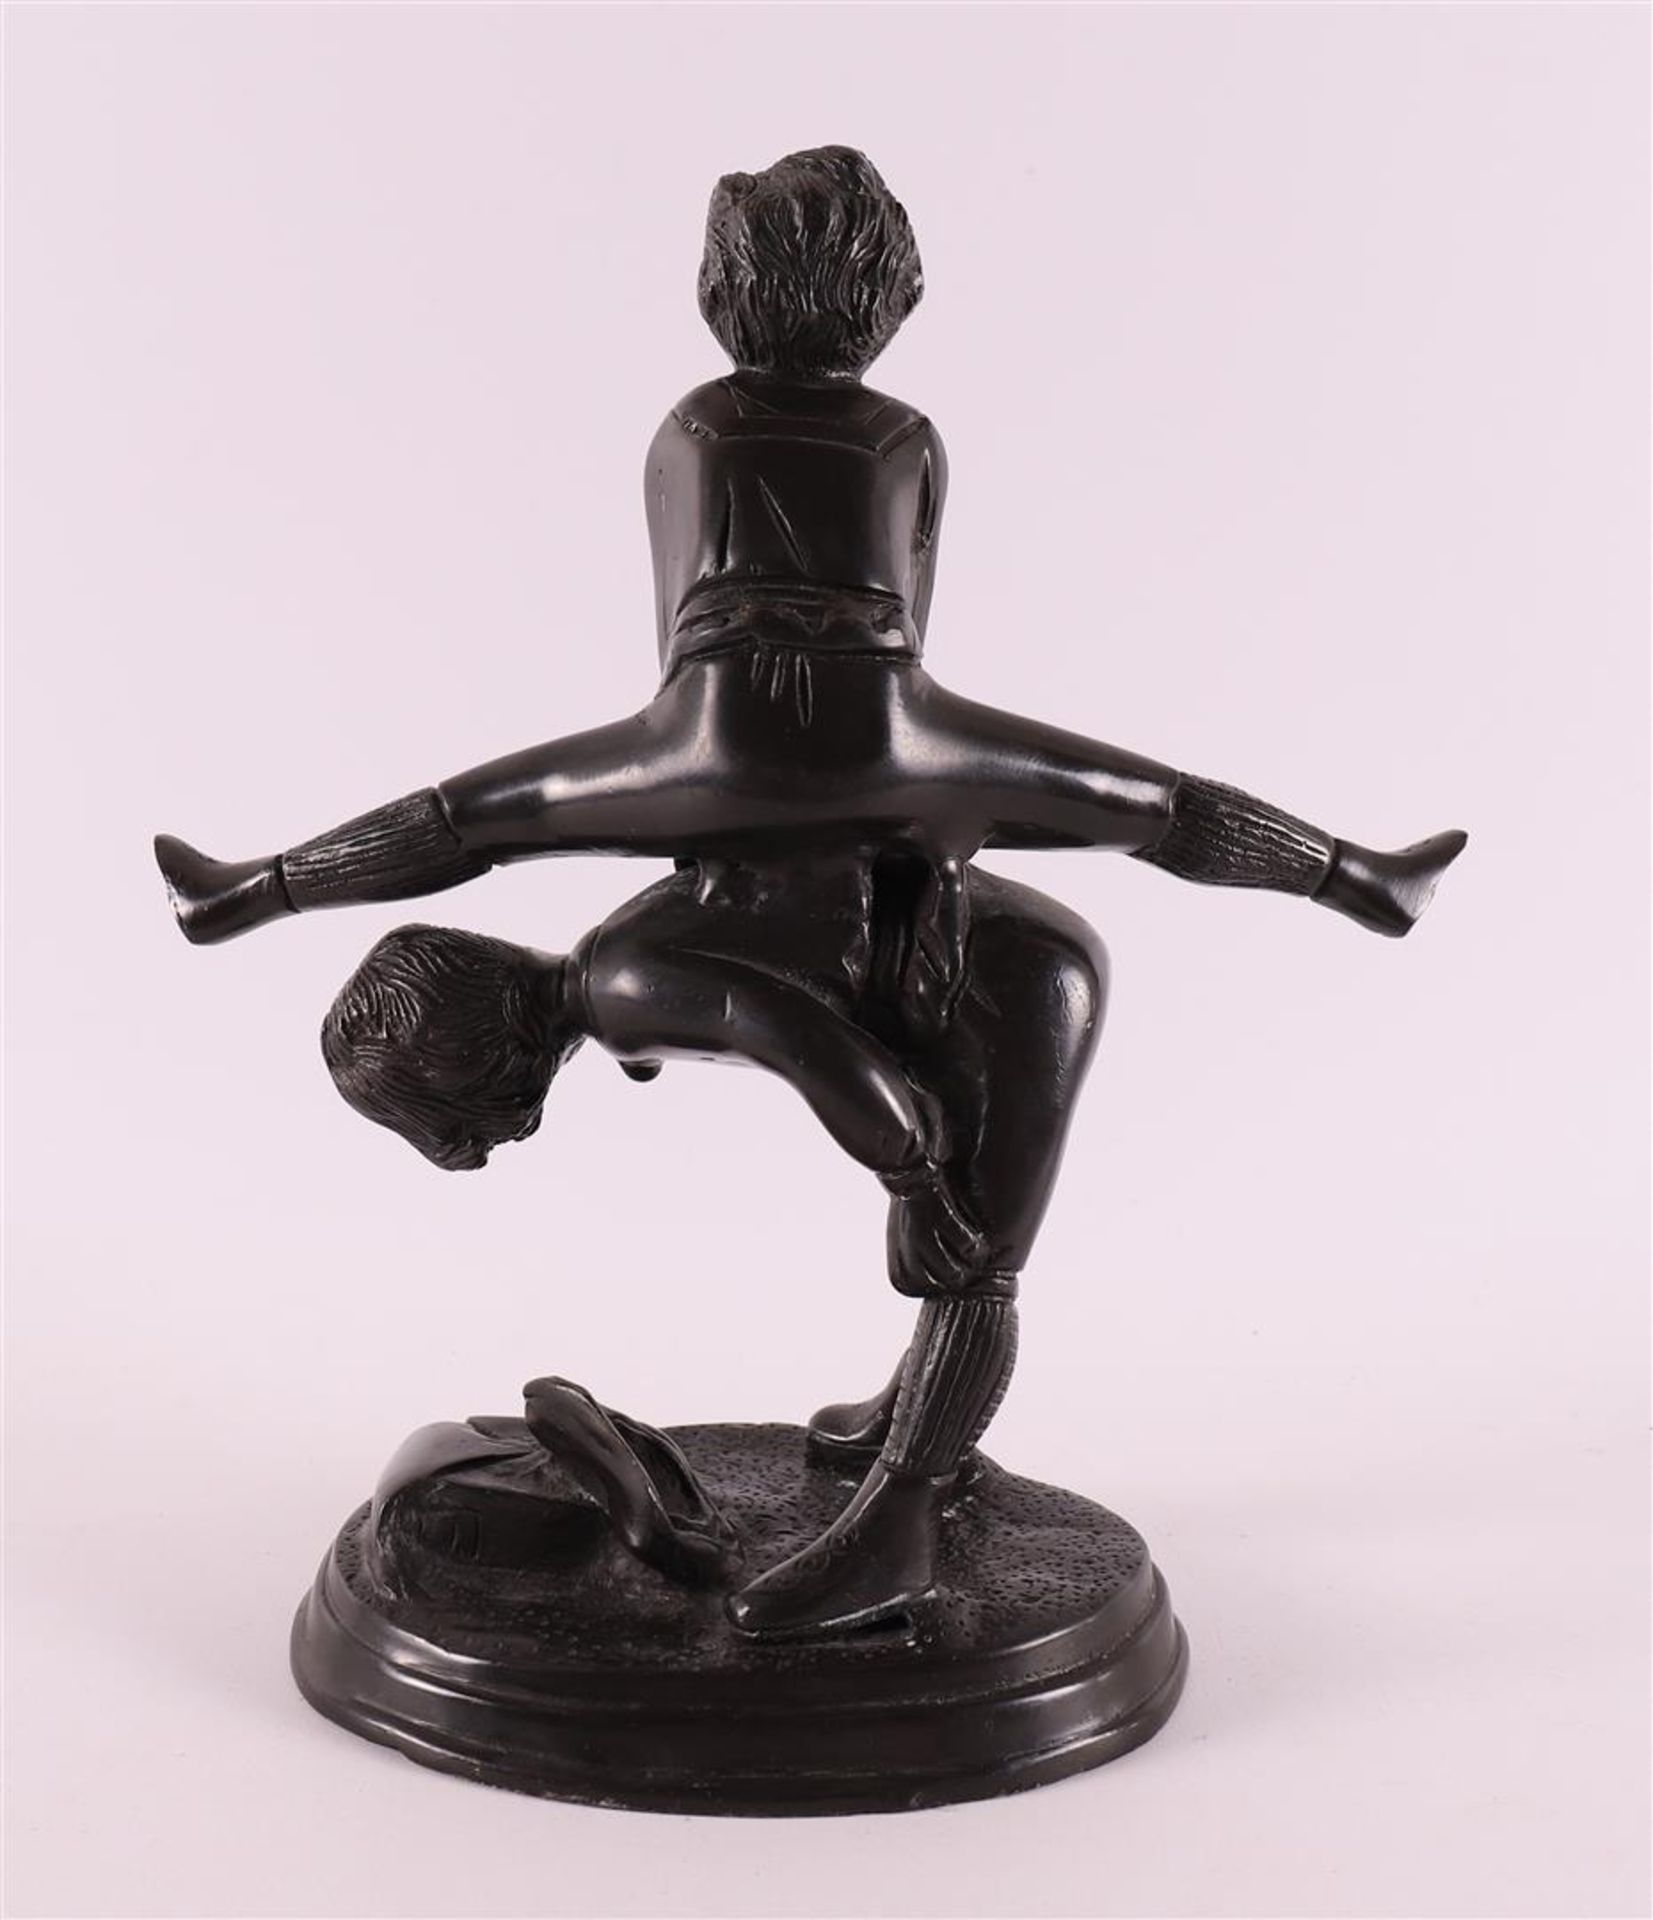 Bronze sculpture of children jumping, based on an antique example, 21st century - Image 2 of 4